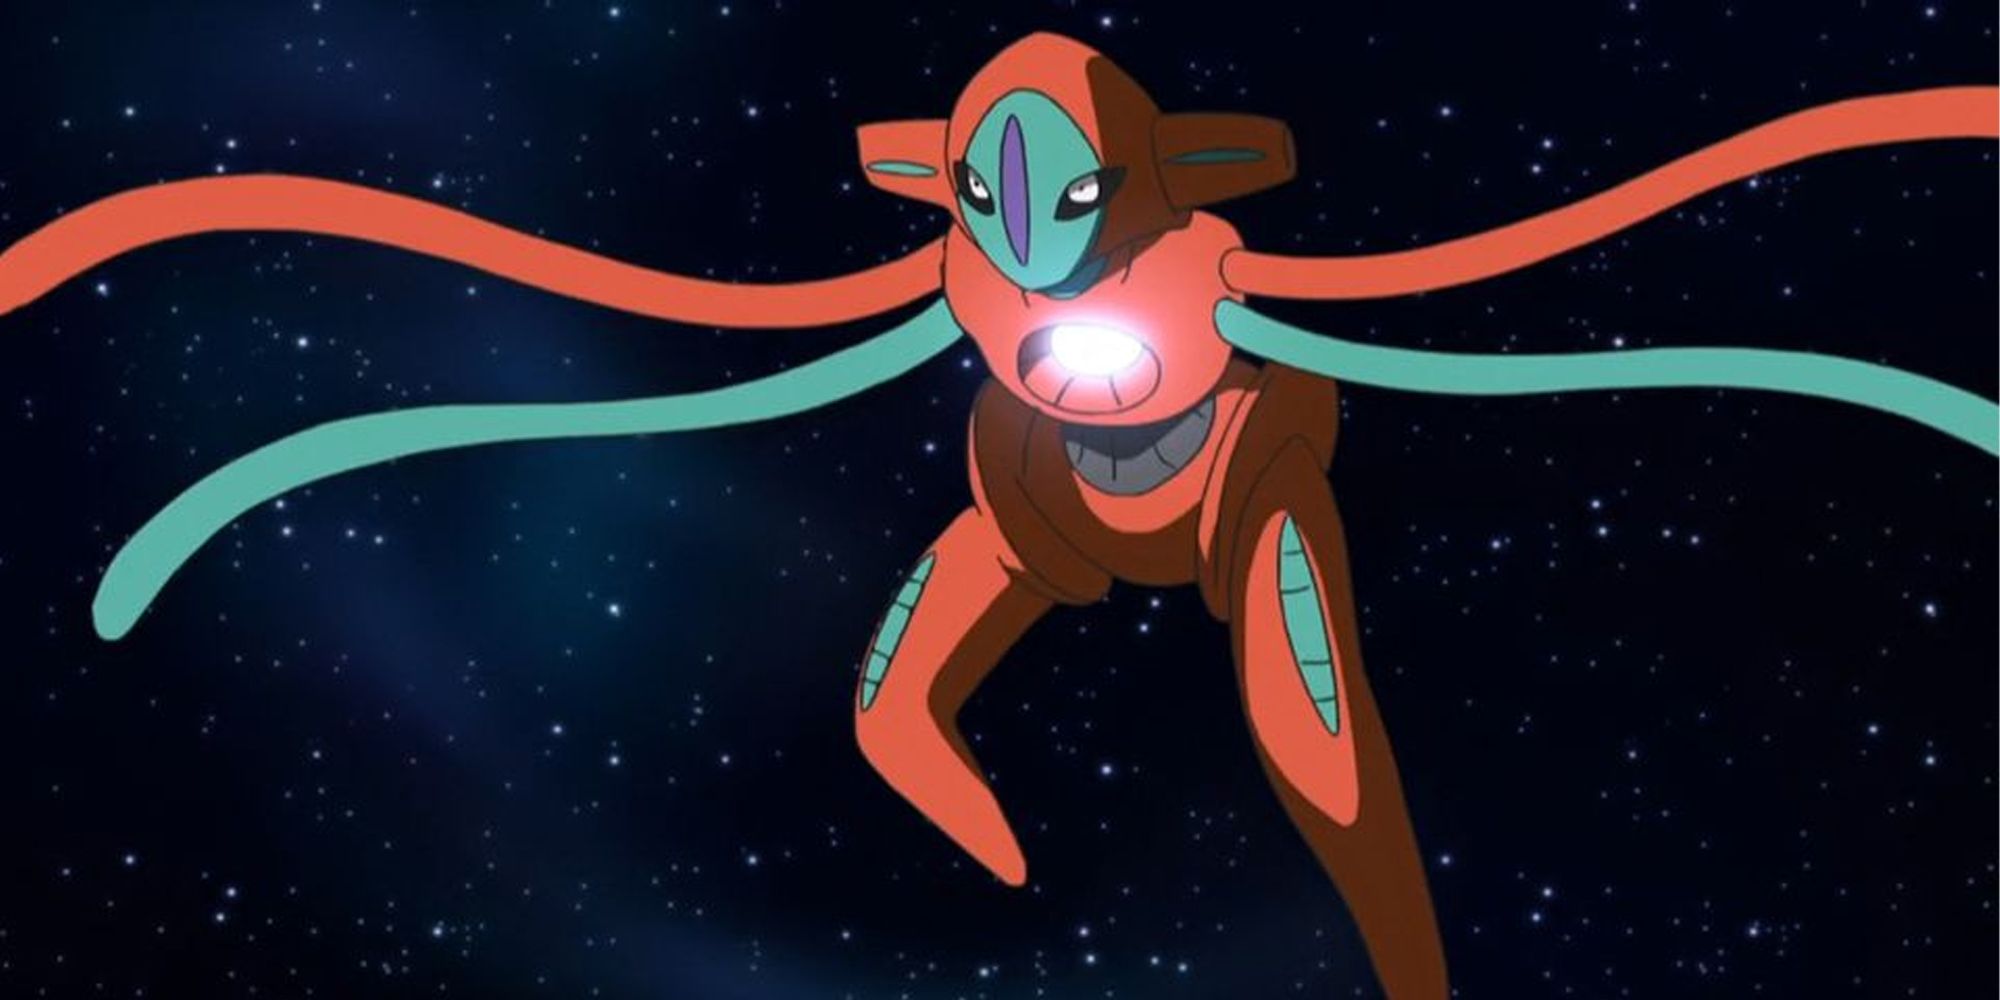 Deoxys from Pokemon anime